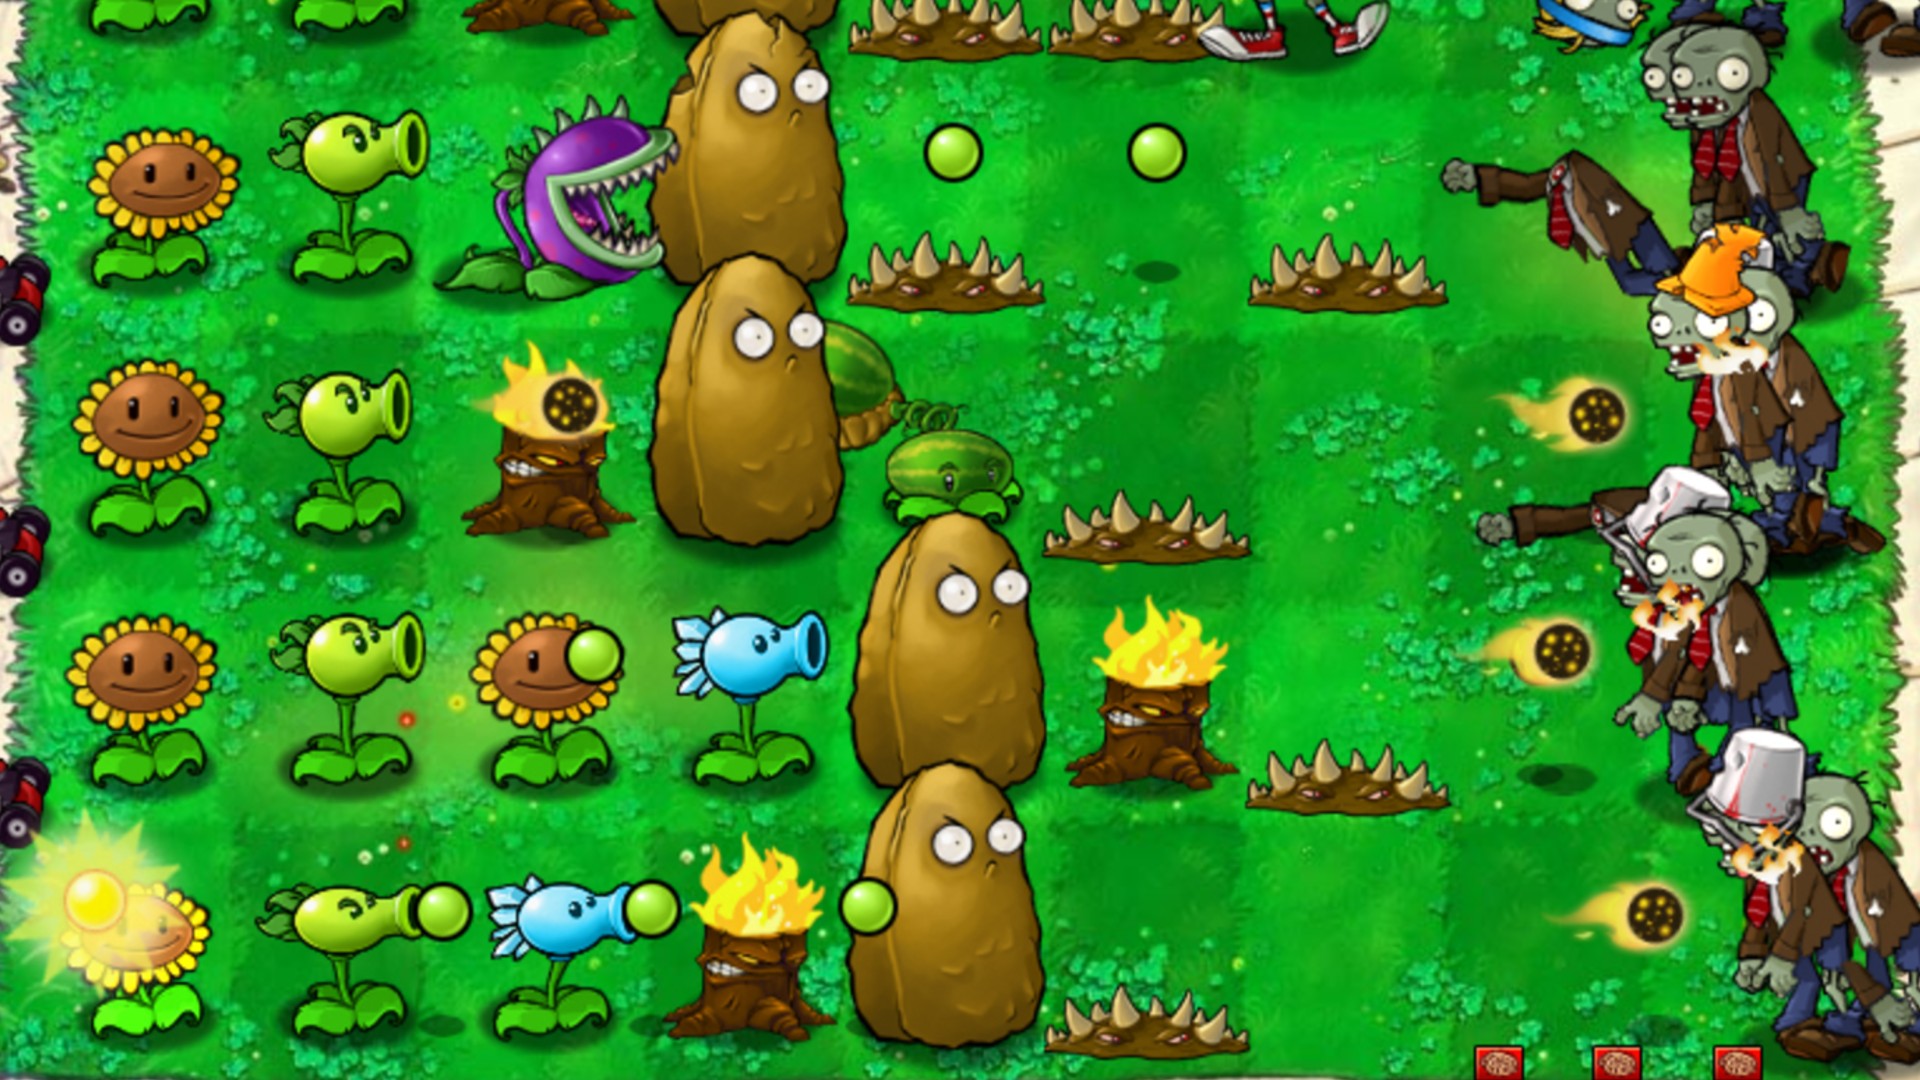 Best management games: zombies approach a lawn from the right; plants on the left shoot pea projectiles at them in Plants vs Zombies.